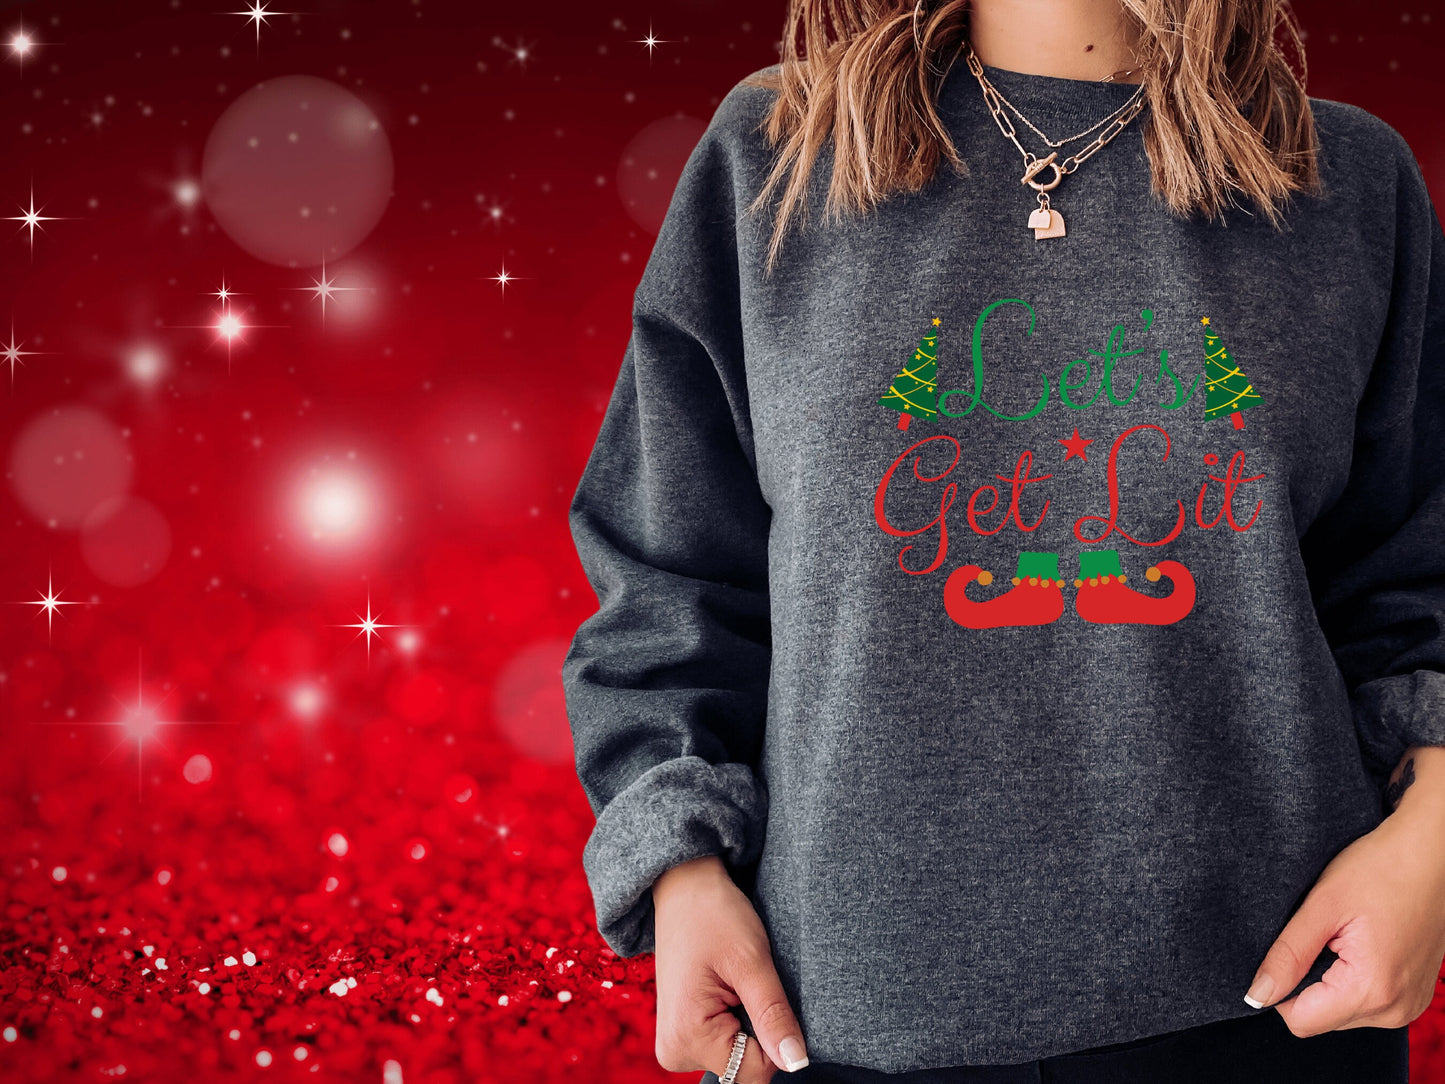 Funny Christmas Sweater, Ugly Christmas Sweater, Funny Christmas Shirt, Women's Christmas Outfit, Holiday Sweater, Christmas Party Shirt